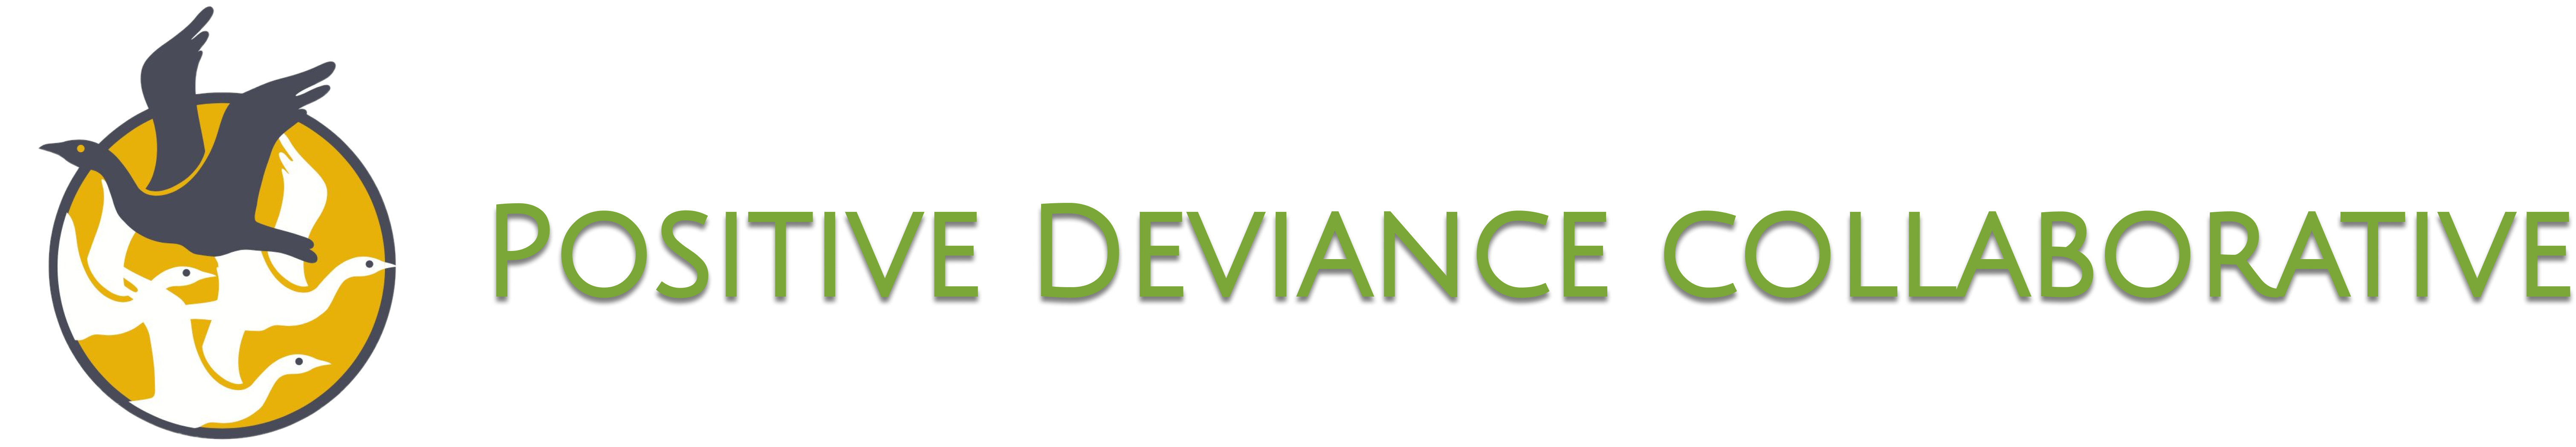 Welcome to the Summer 2020 issue of the bi-annual Positive Deviance newsletter!